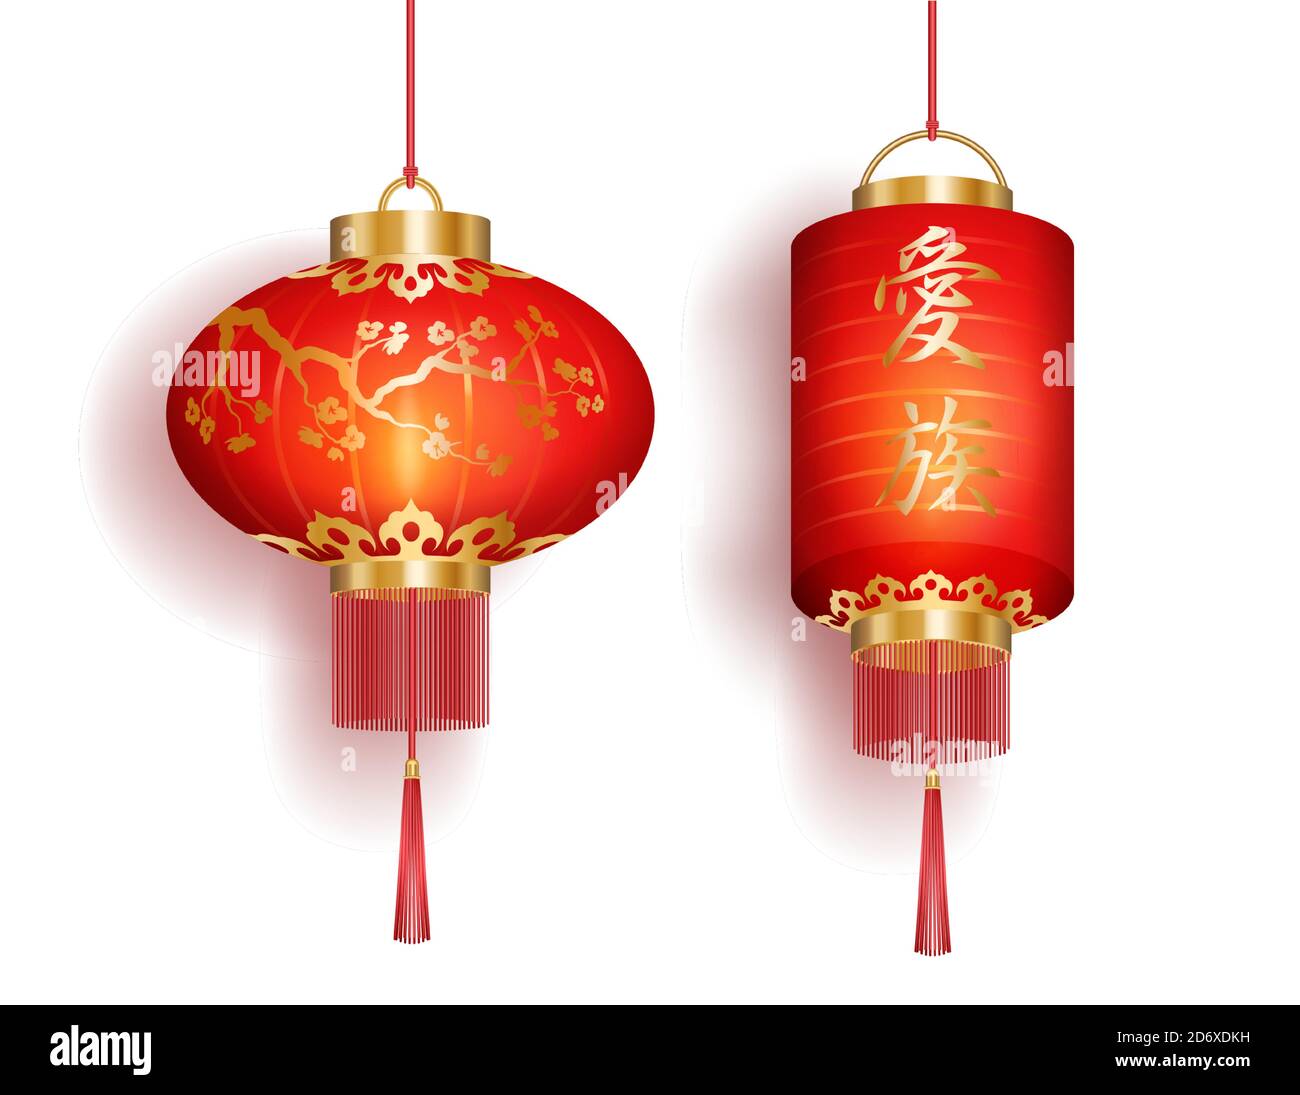 Set of red Chinese lanterns circular and cylindrical shape, vector illustration Stock Vector